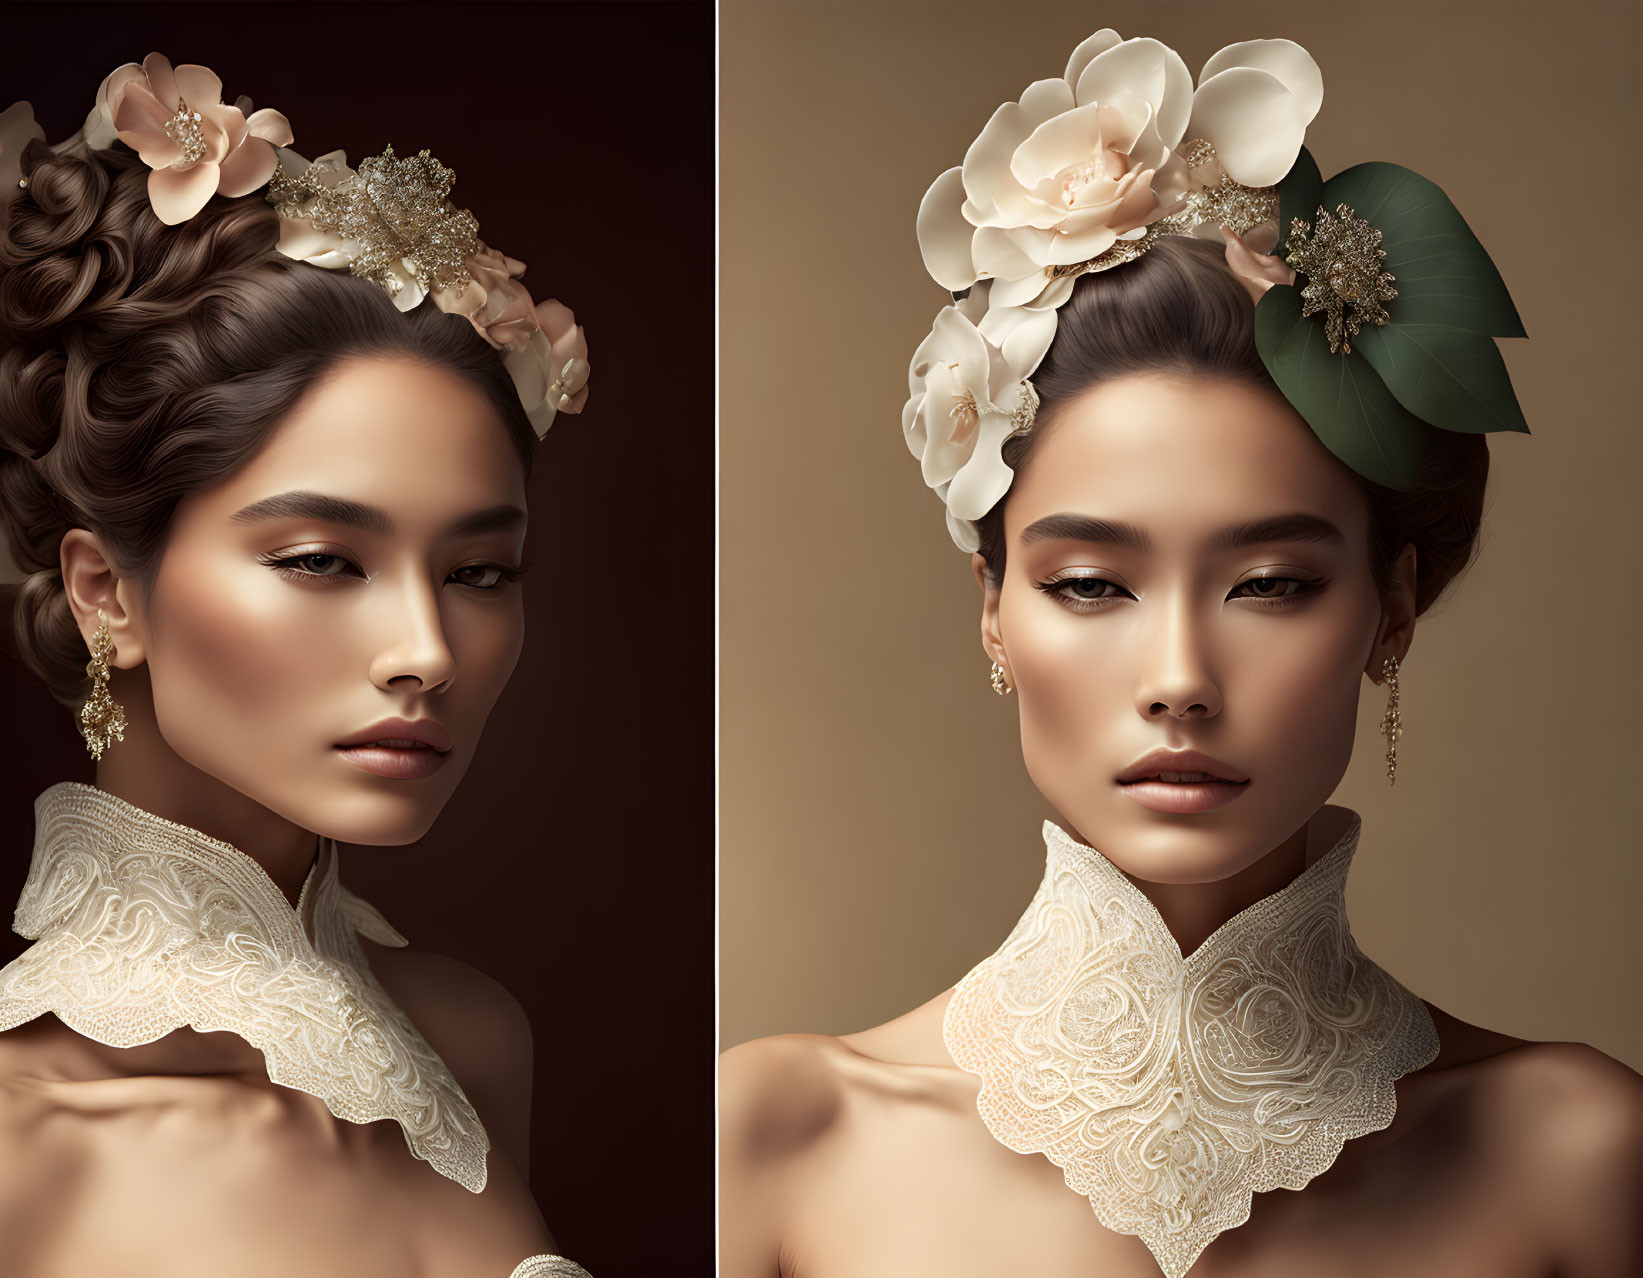 Dual portraits of woman with elegant makeup and hairstyles, floral hair accessories, vintage lace collars.